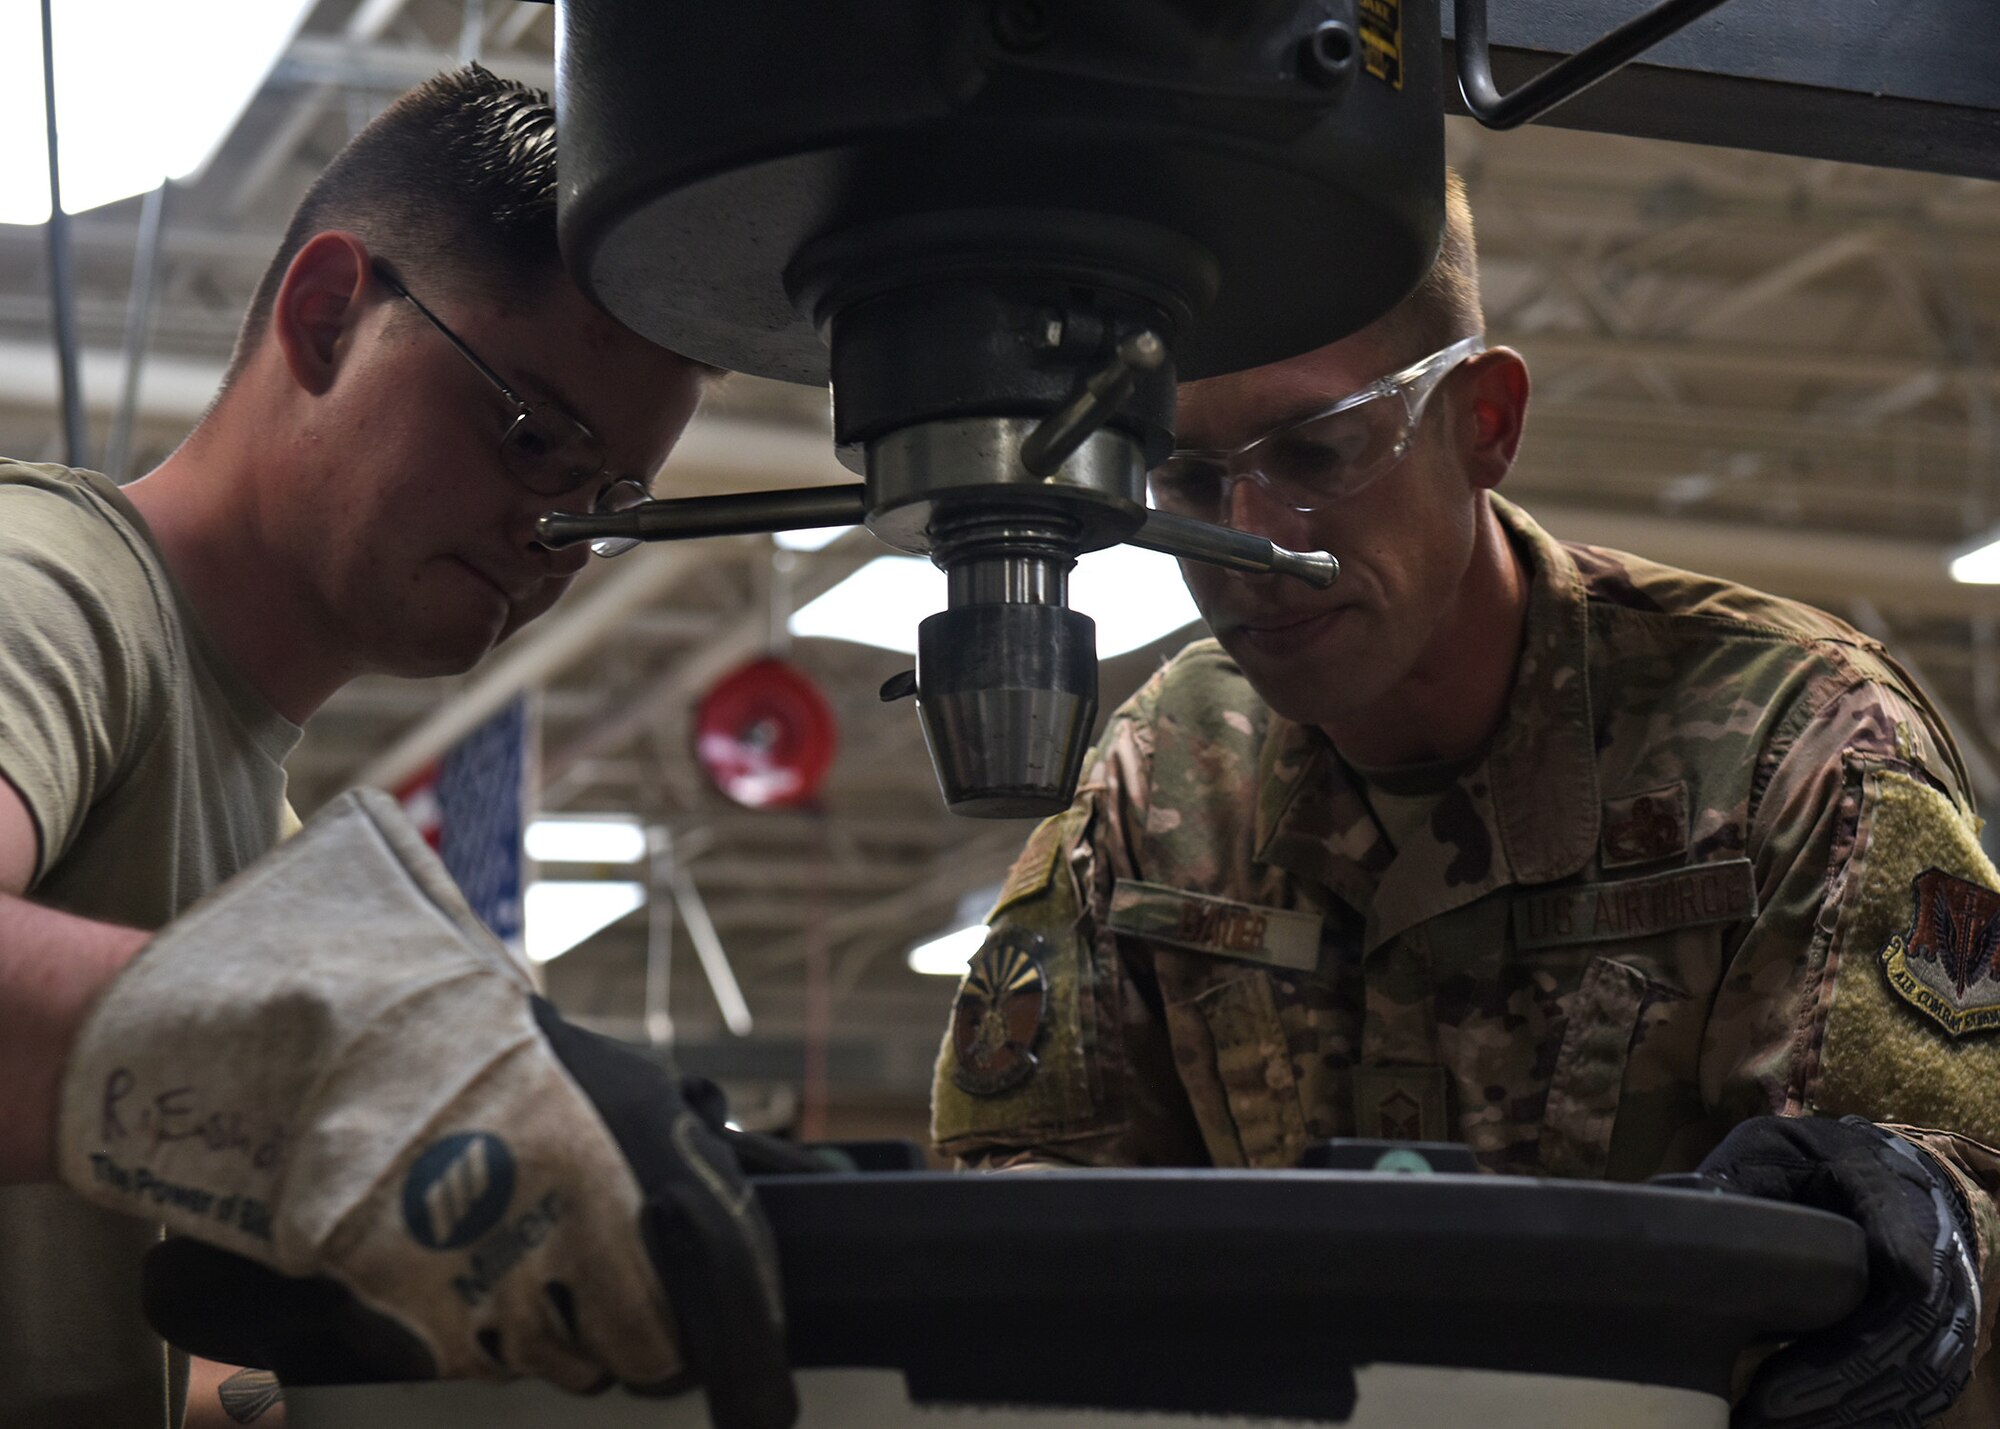 A photo of two Airmen working working with tools.